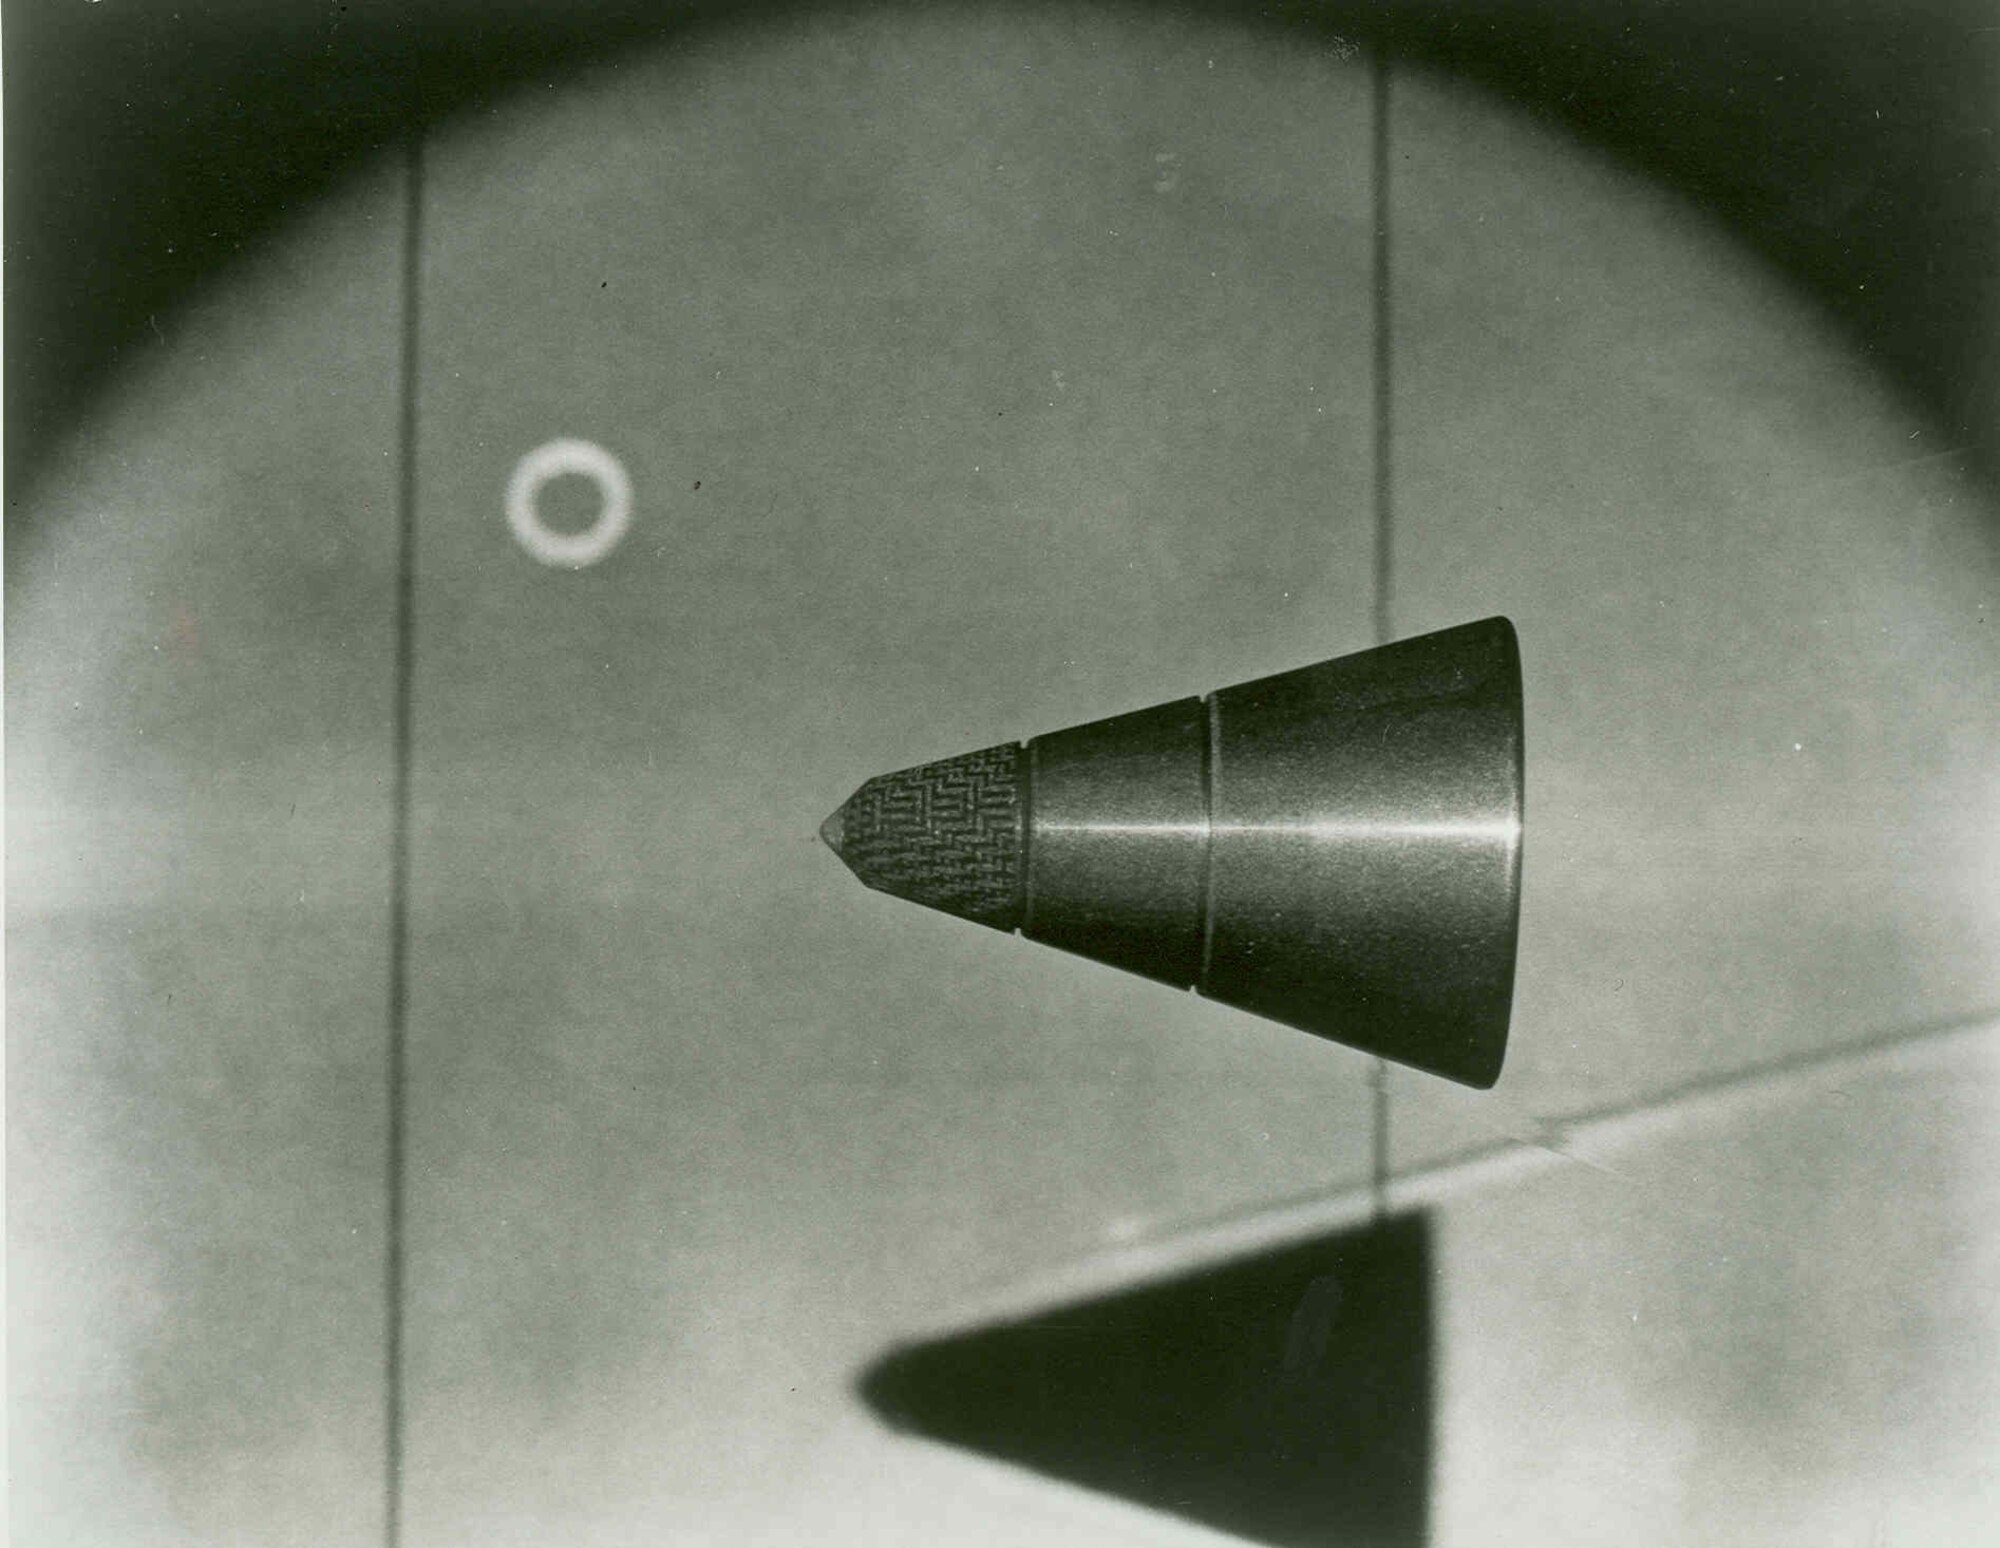 LASER-ILLUMINTAED PHOTOGRAPHY was developed at the Arnold Engineering Development Complex to study ablative effects on a 12,000 mph free-flight projectile in the Center’s 1,000-foot hypervelocity ballistic range. The technique provided a photographic exposure equivalent to 20 billionths of a second. (1970 AEDC Photo)